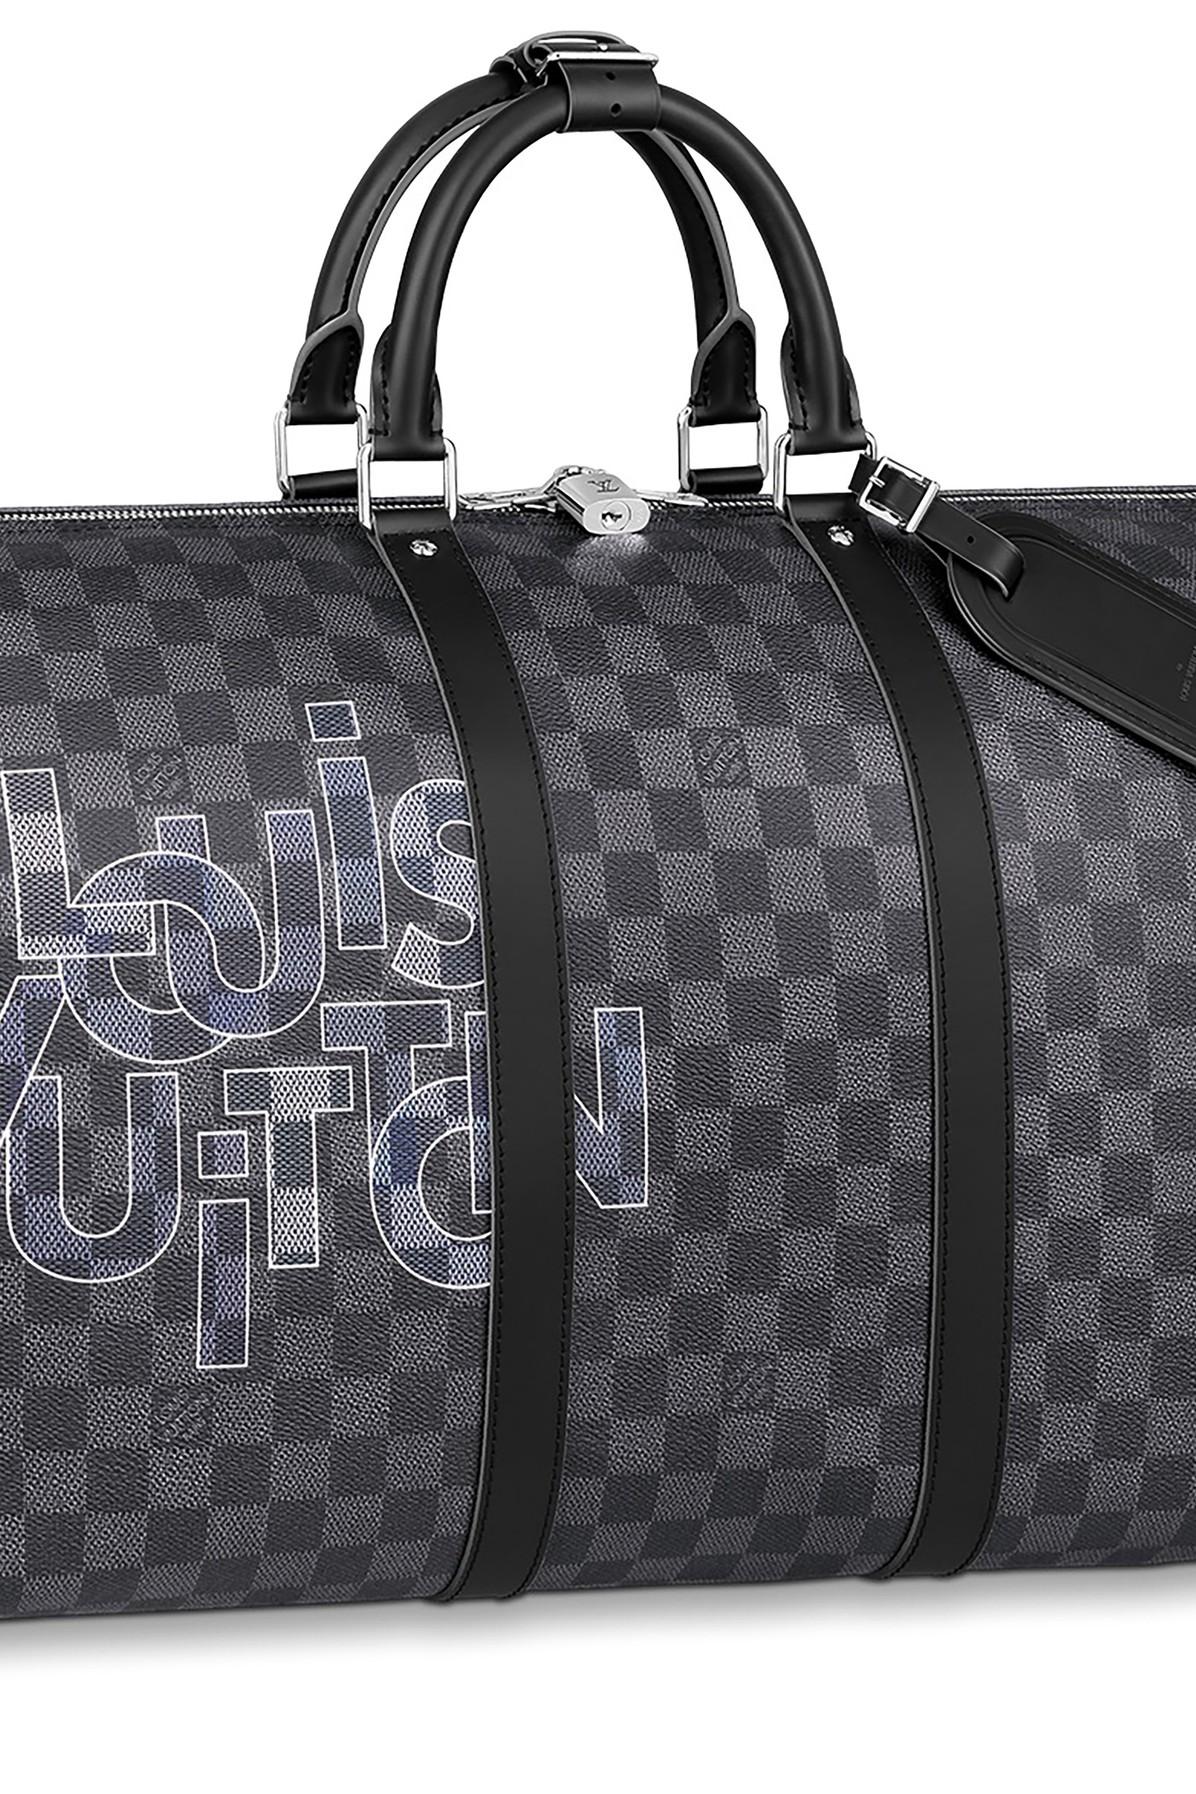 LOUIS VUITTON LV Keepall Bandouliere 50 Used Boston Bag Gray Ombre